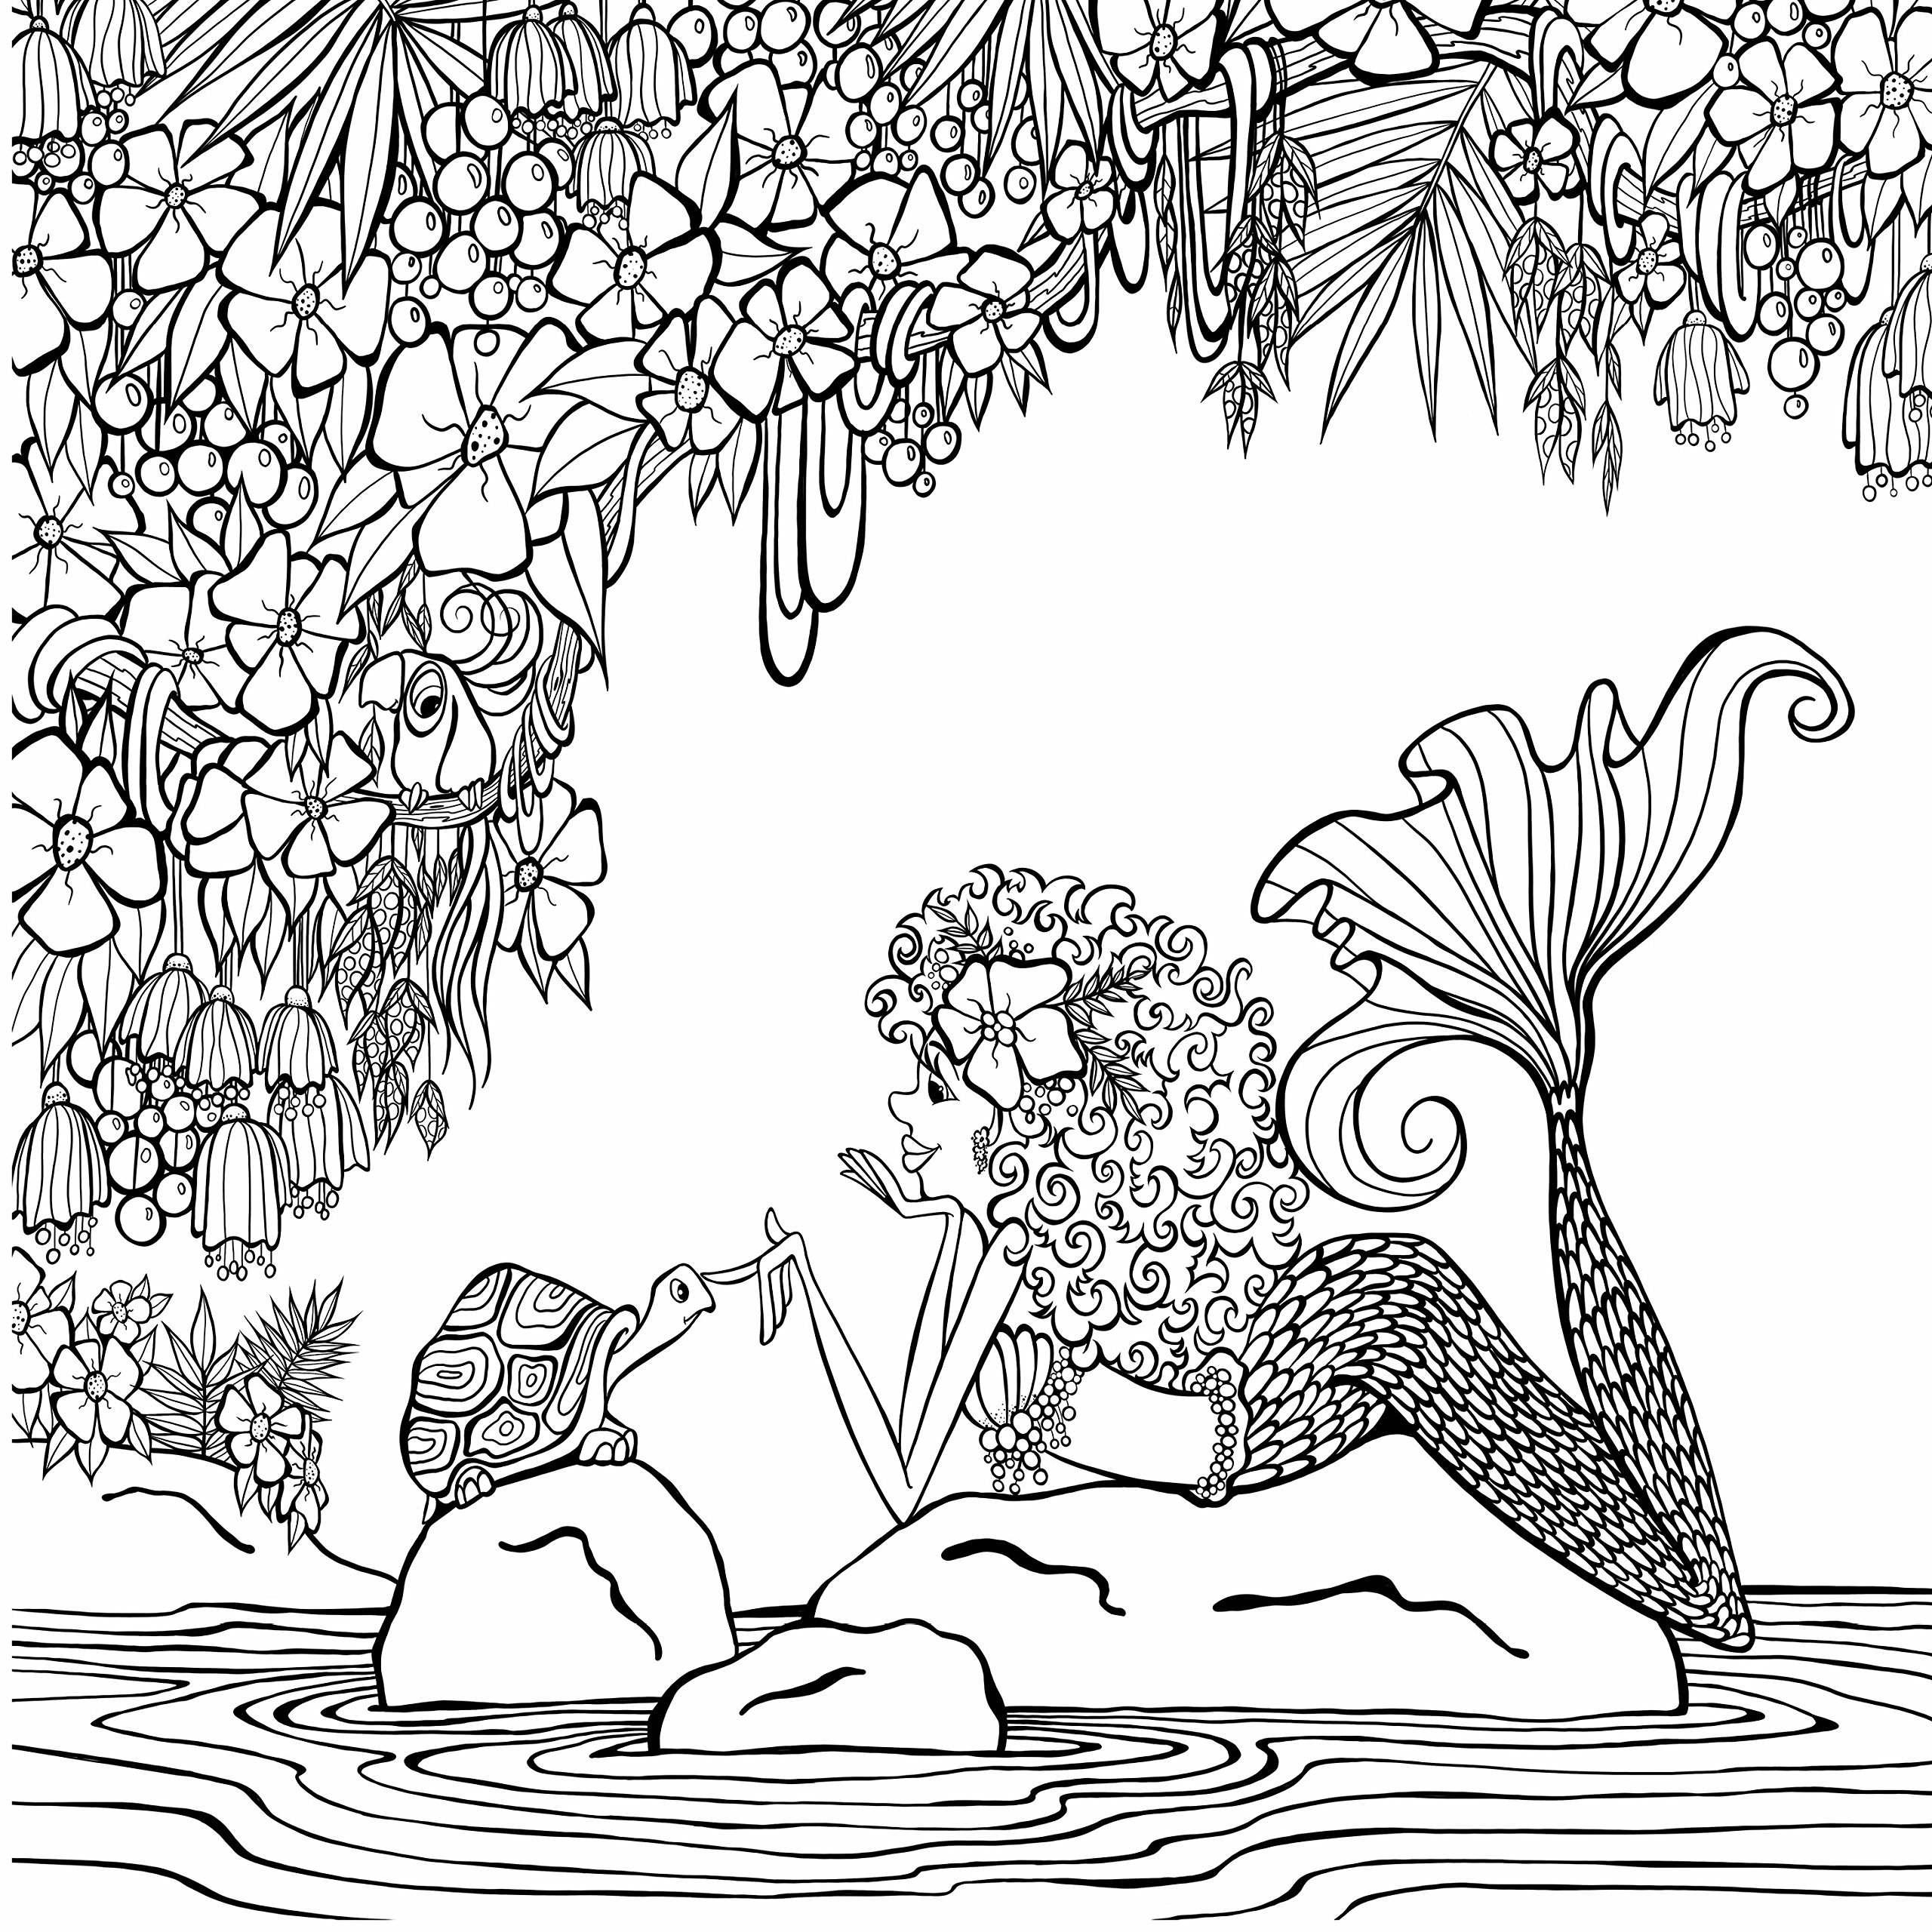 Amazon.com: Zendoodle Coloring Presents Mermaids in Paradise: An Artist's Coloring  Book: 9781250147691: Klette, Denyse: Books